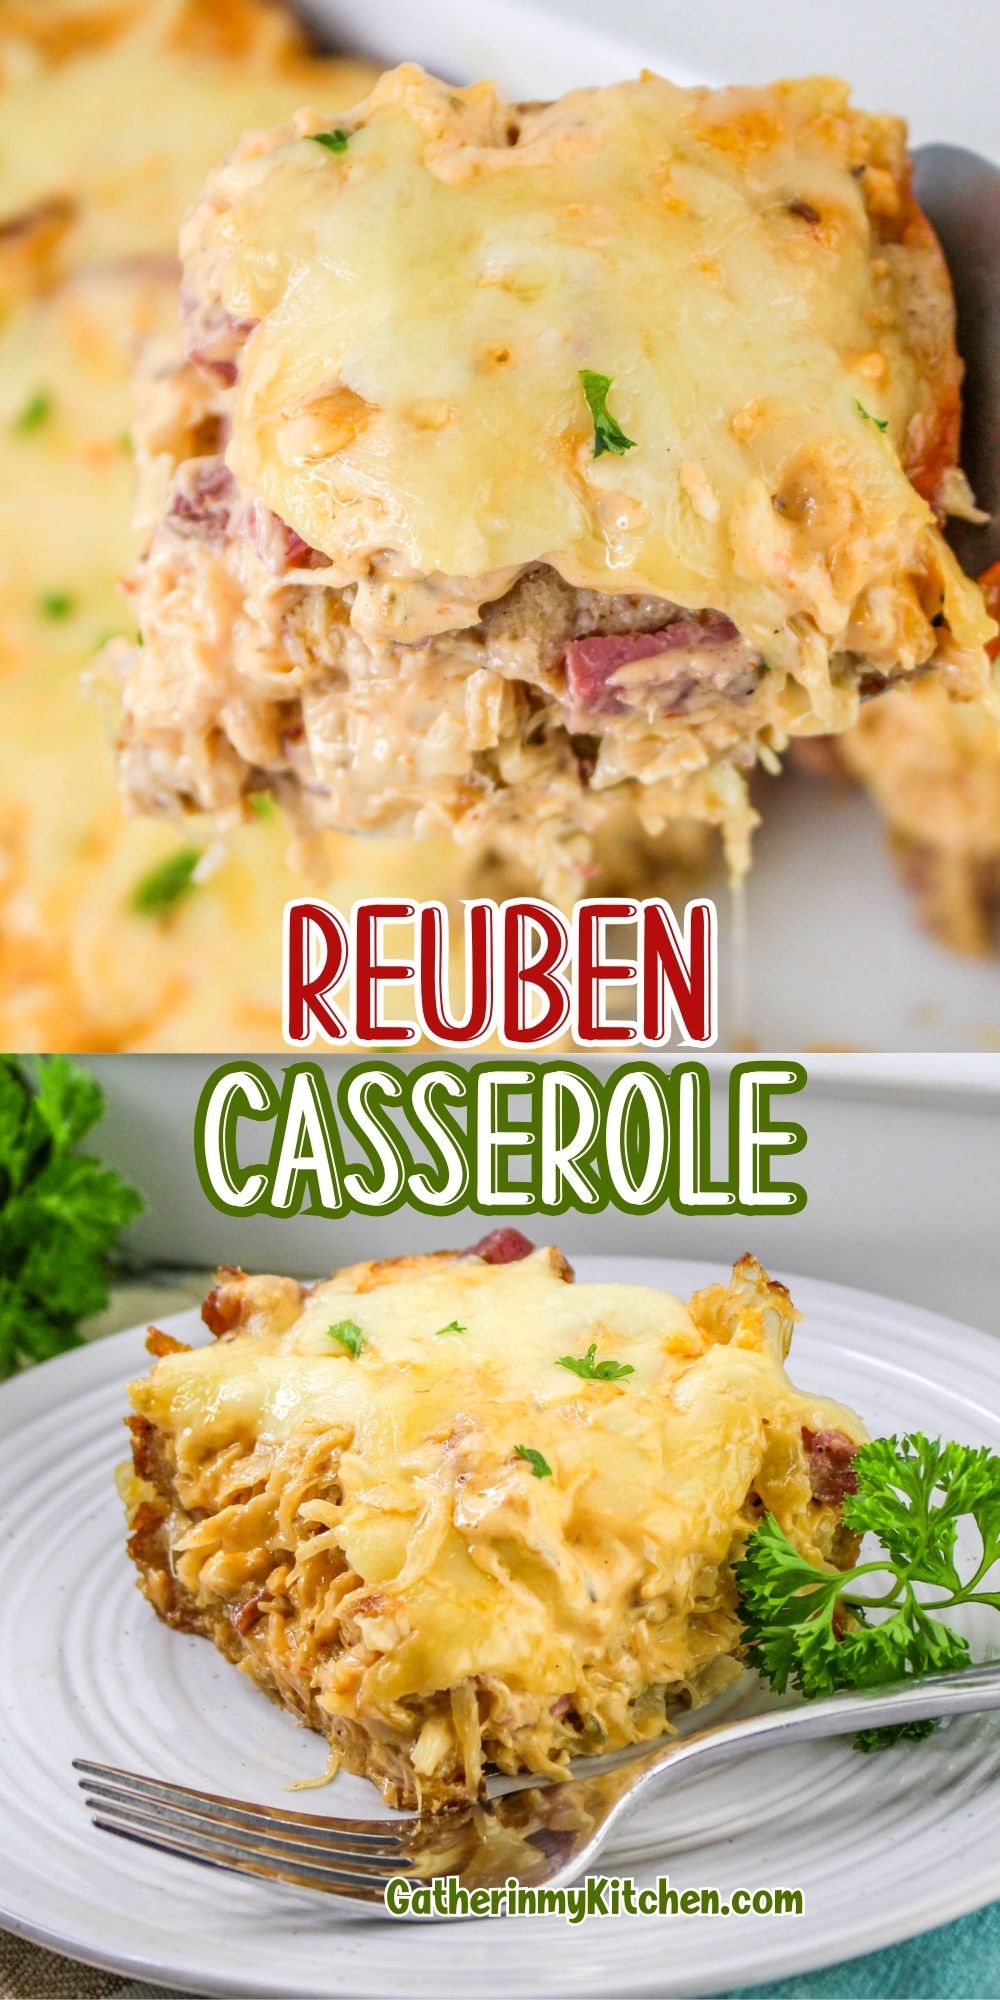 Pin image: top and bottom images of Reuben casserole with the words "Reuben Casserole" in the middle.